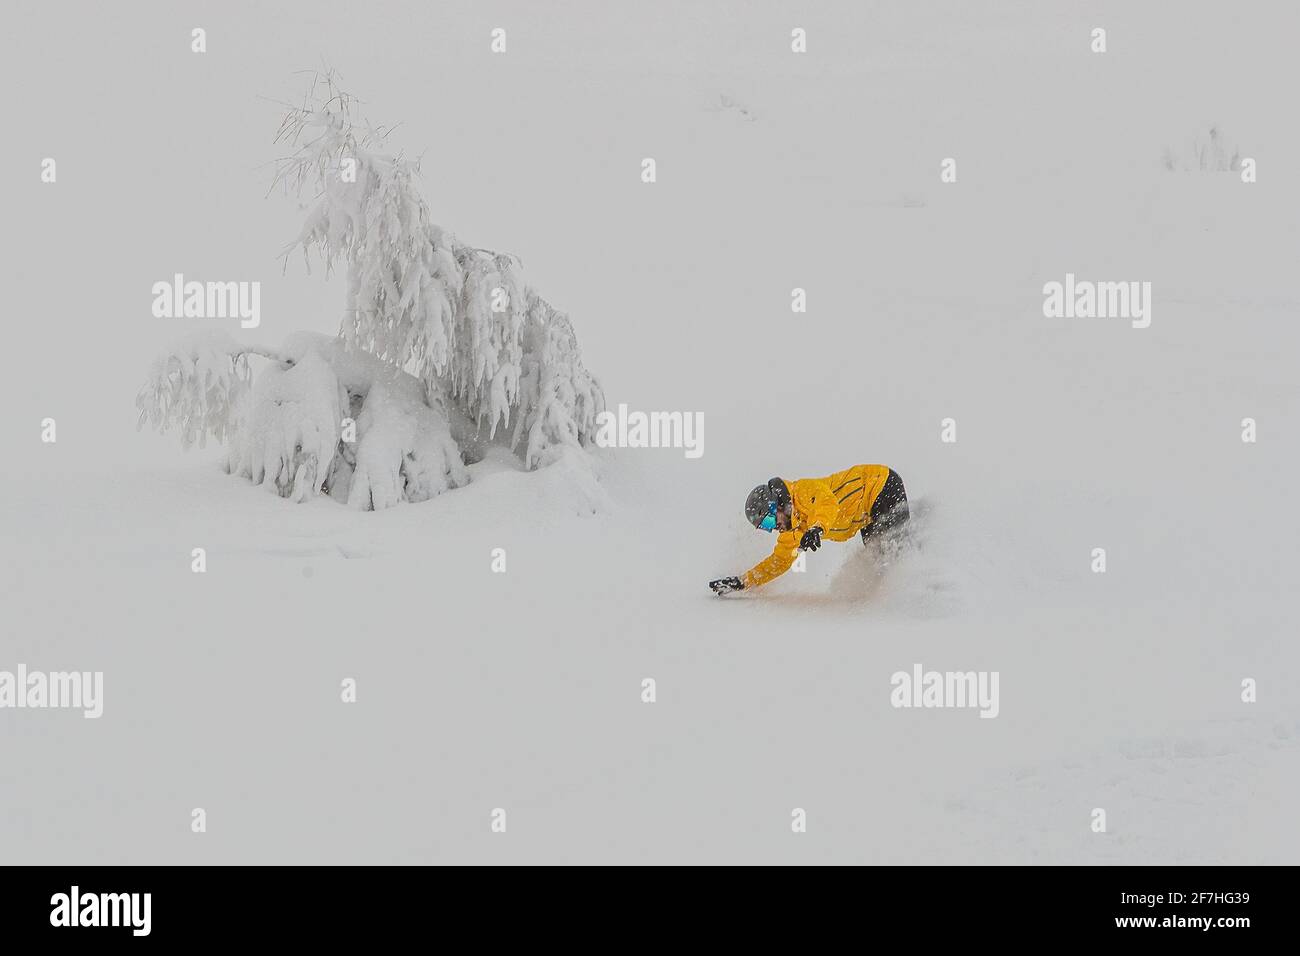 A snowboarder in powder snow about to crash in a curve. Boarder with yellow clothing with black trousers and orange board falling in deep powder on a Stock Photo